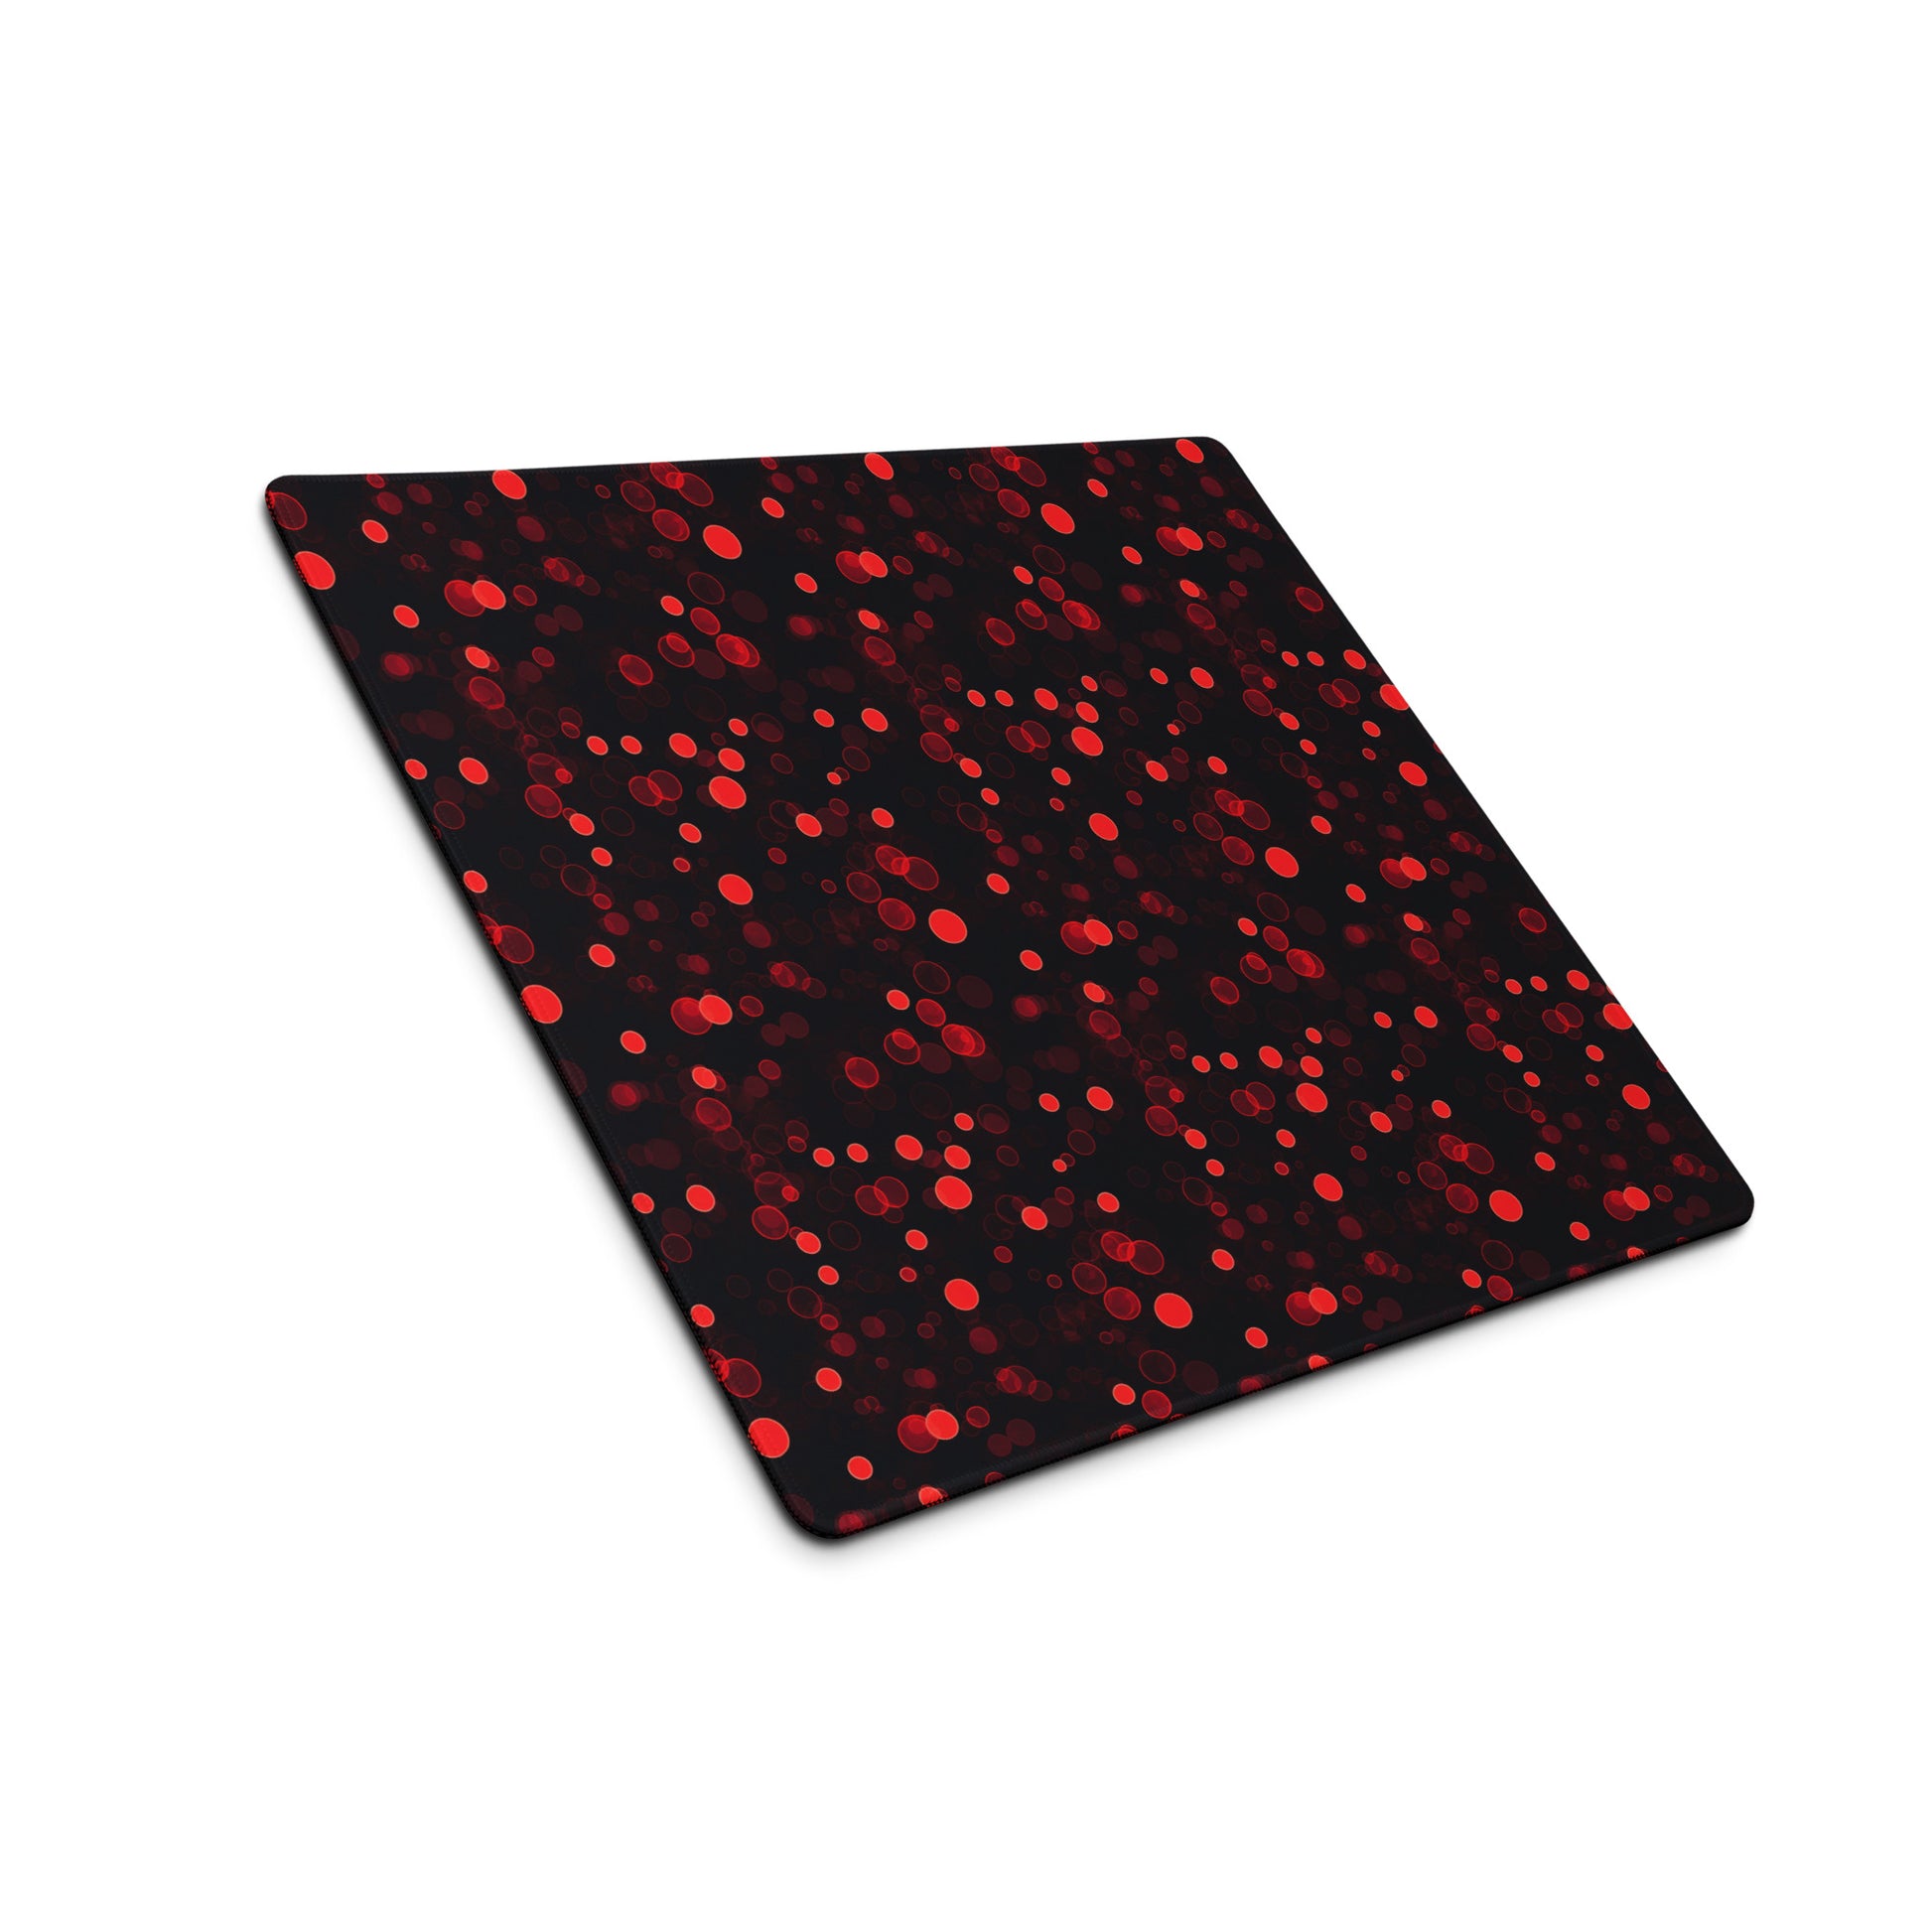 A 18" x 16" desk pad with red polka dots sitting at an angle.